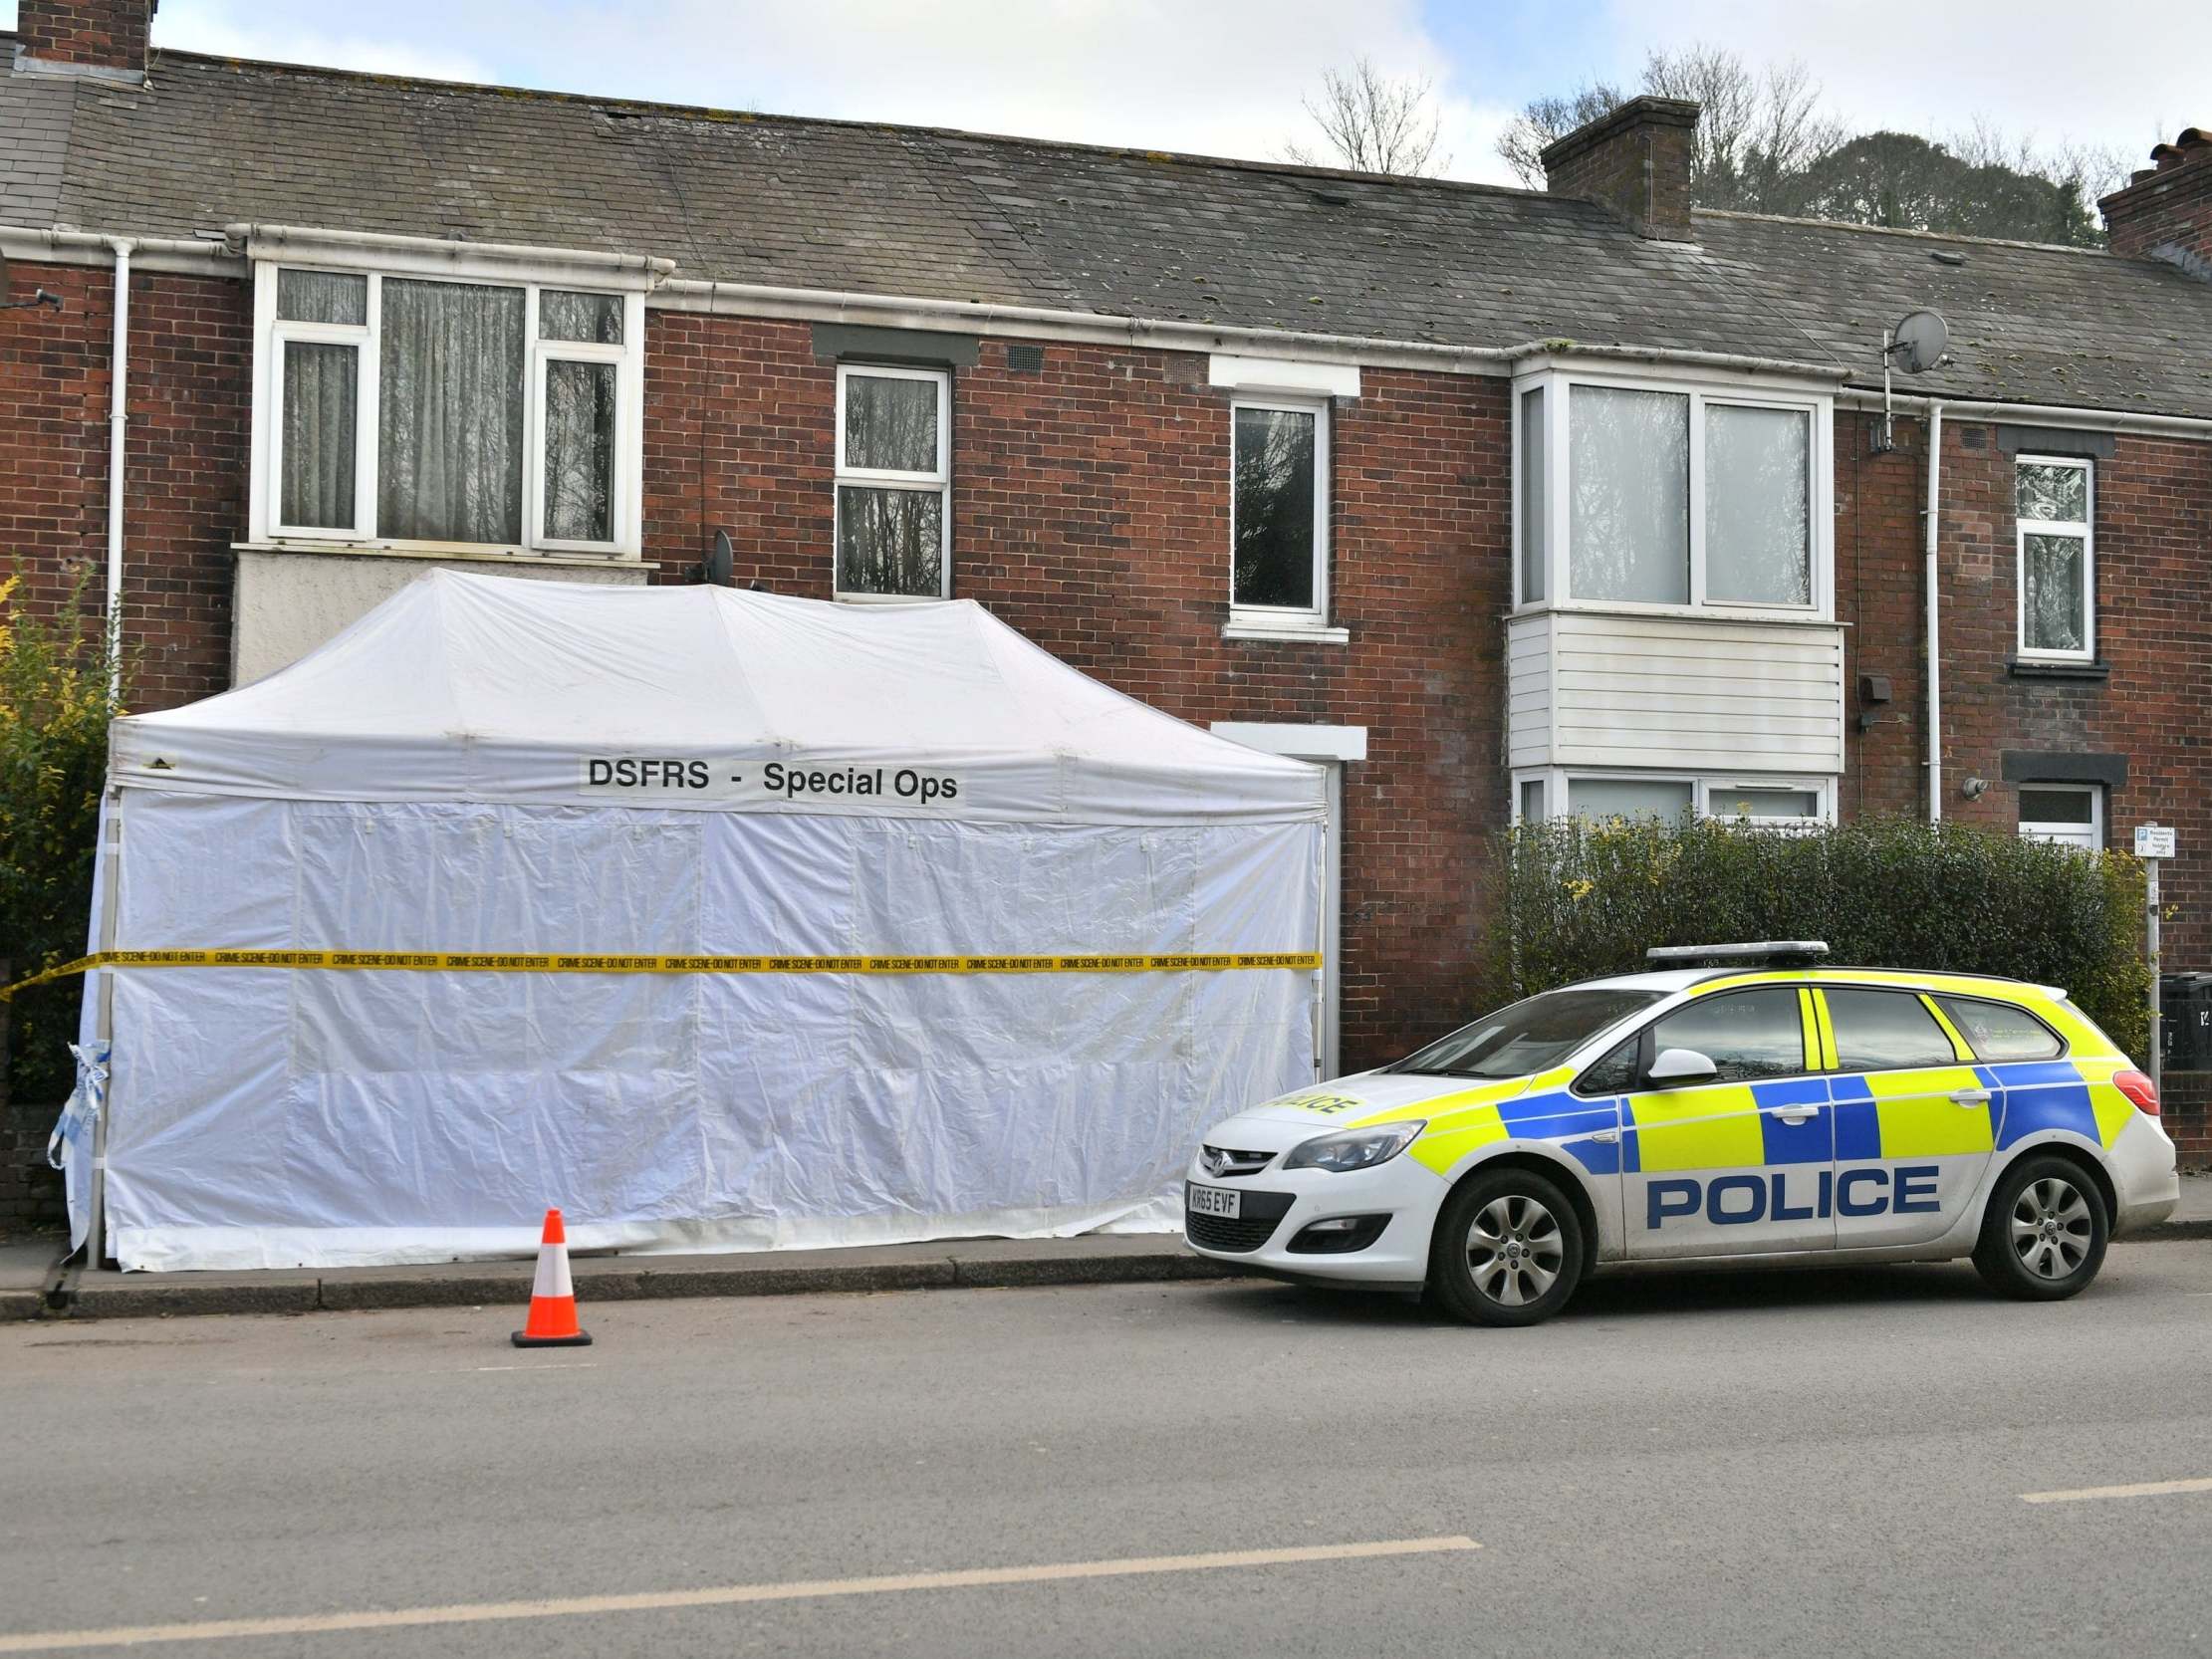 The scene in Bonhay Road, Exeter, Devon, where the body of Anthony Payne, 80, was discovered on 11 February, 2019